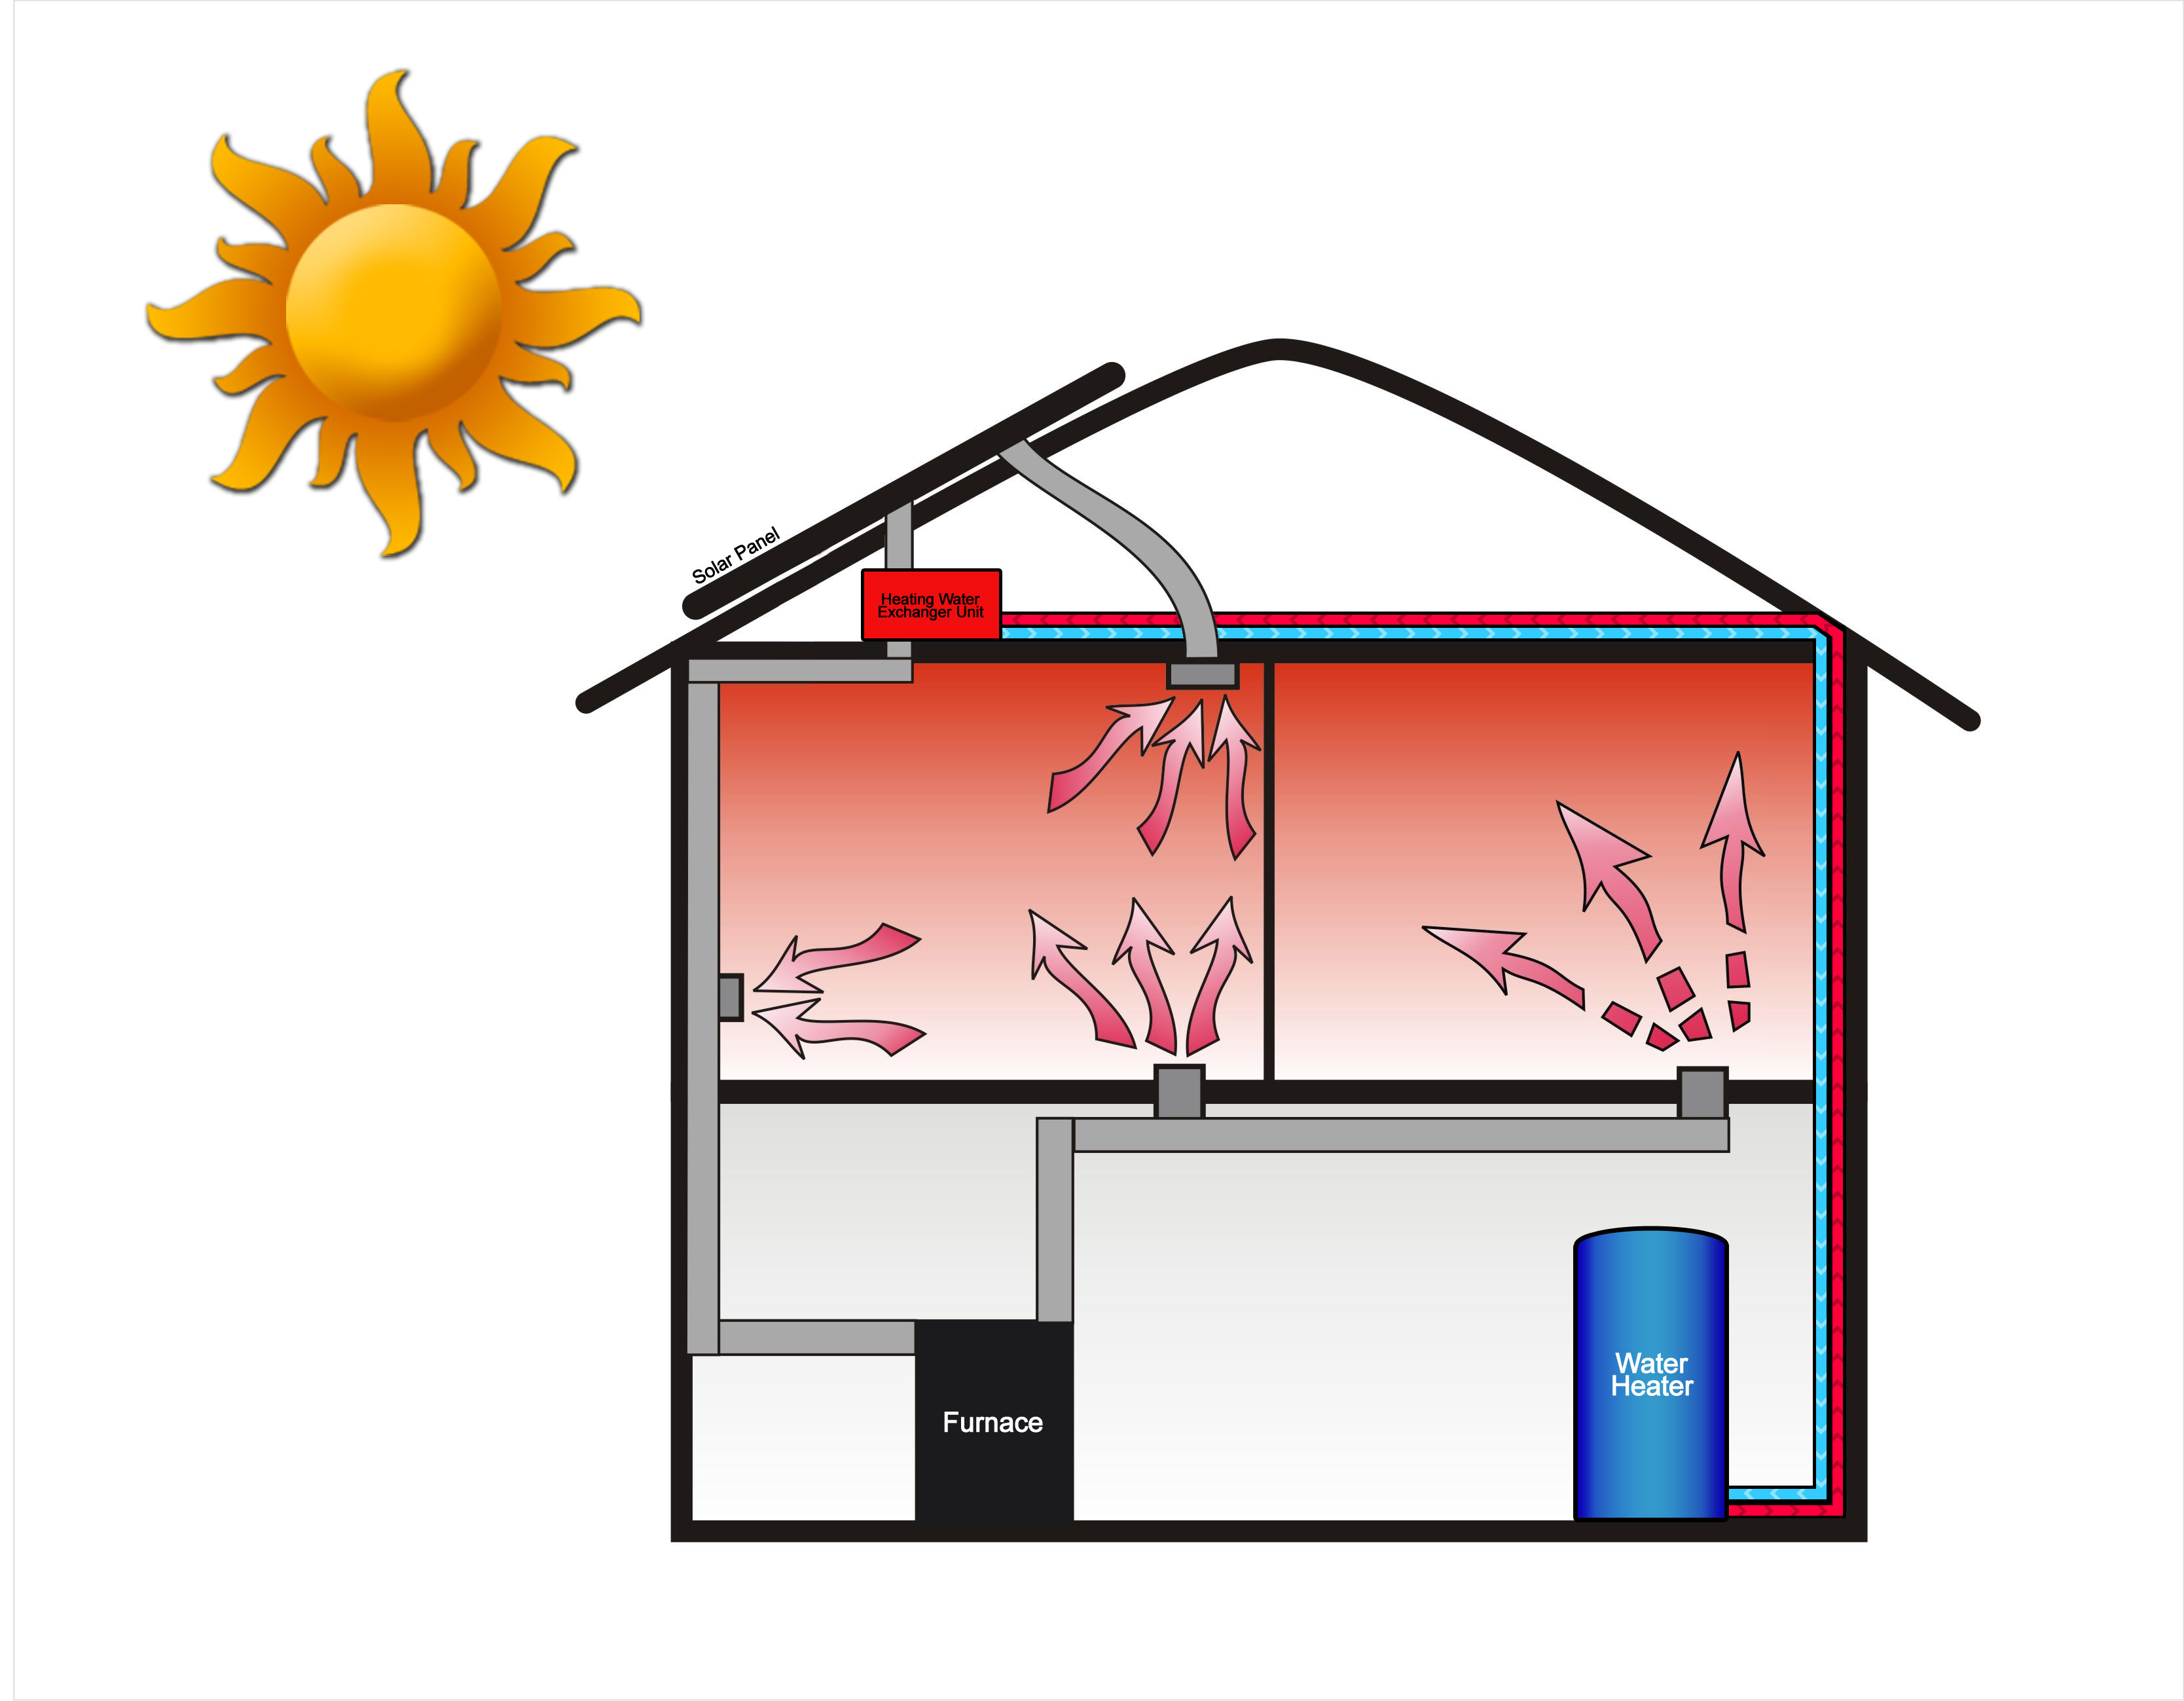 solar air heat water heater system with furnace attachment